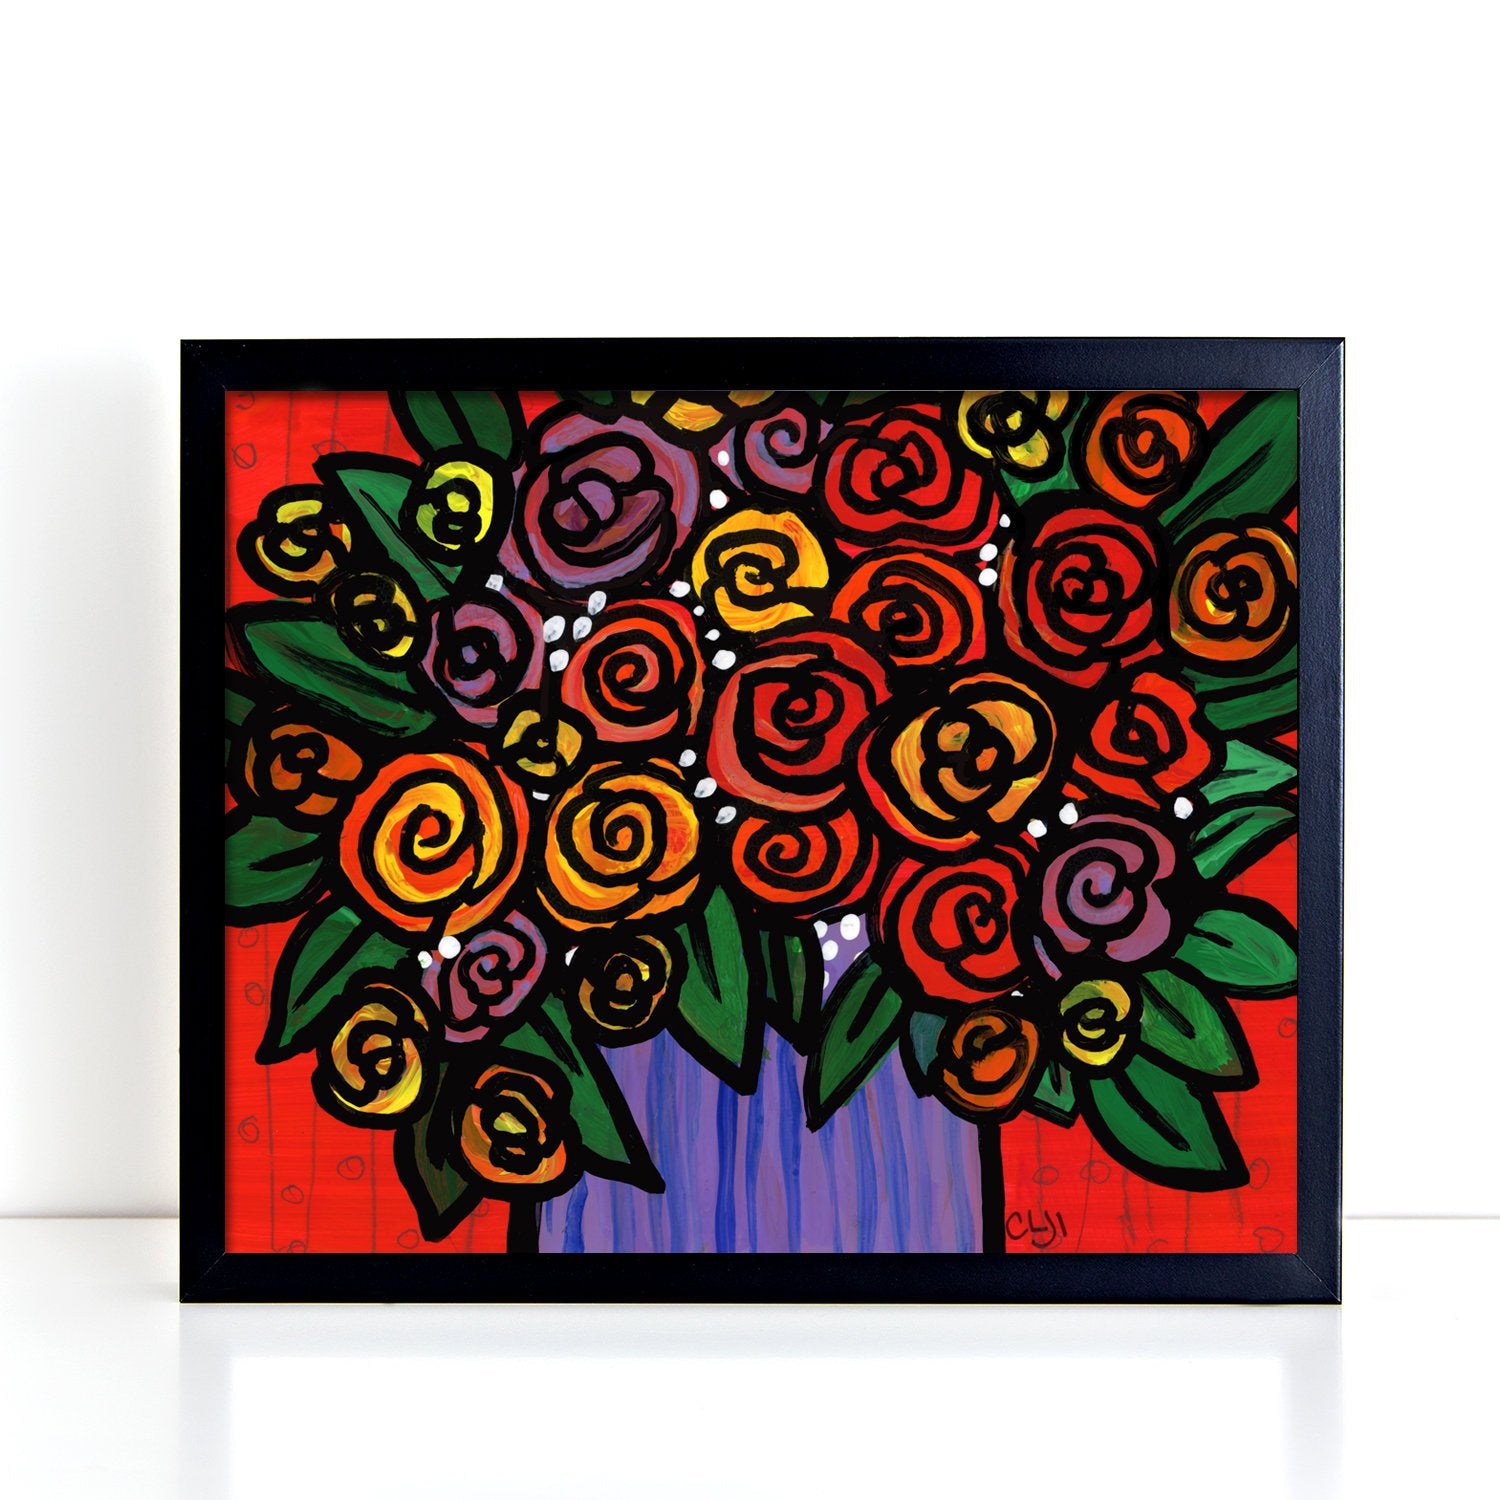 All the Roses Print - Colorful Floral Art Giclee for Bedroom, Bathroom, Living Room 